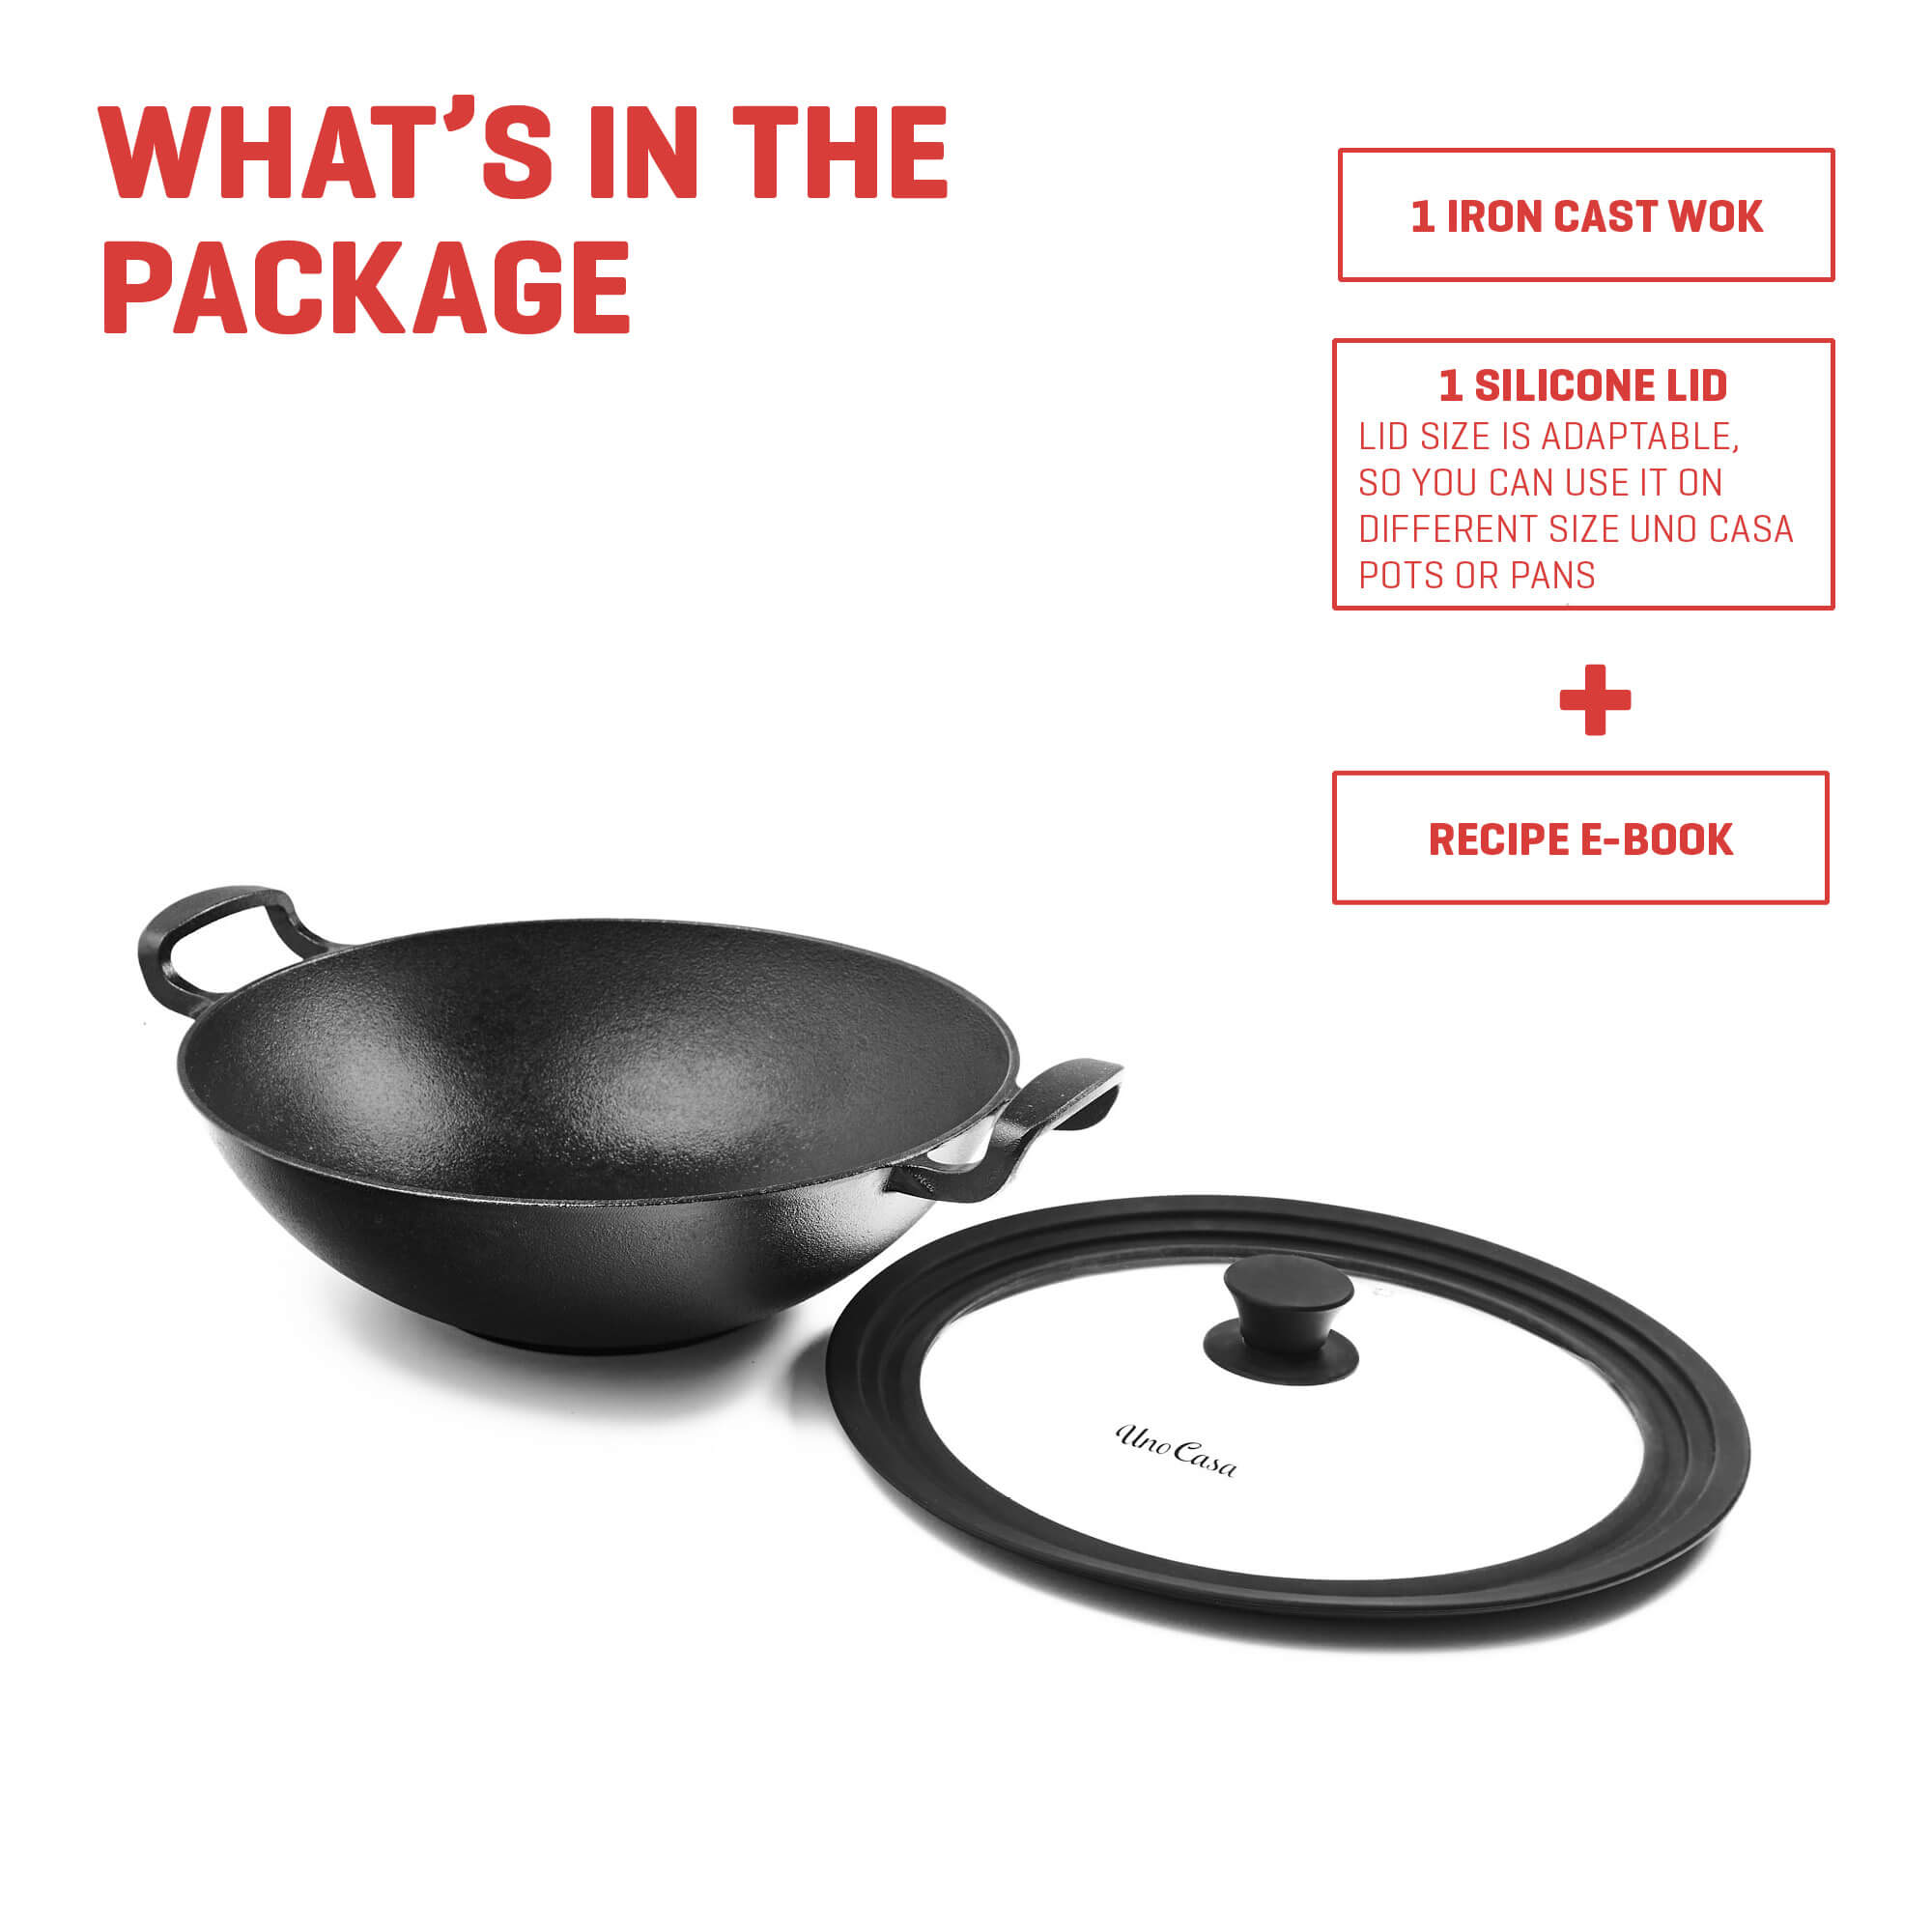 Uno Casa Cast Iron Wok Pan - Flat Bottom Wok with Silicone Lid - 12.5 inch, 5.2